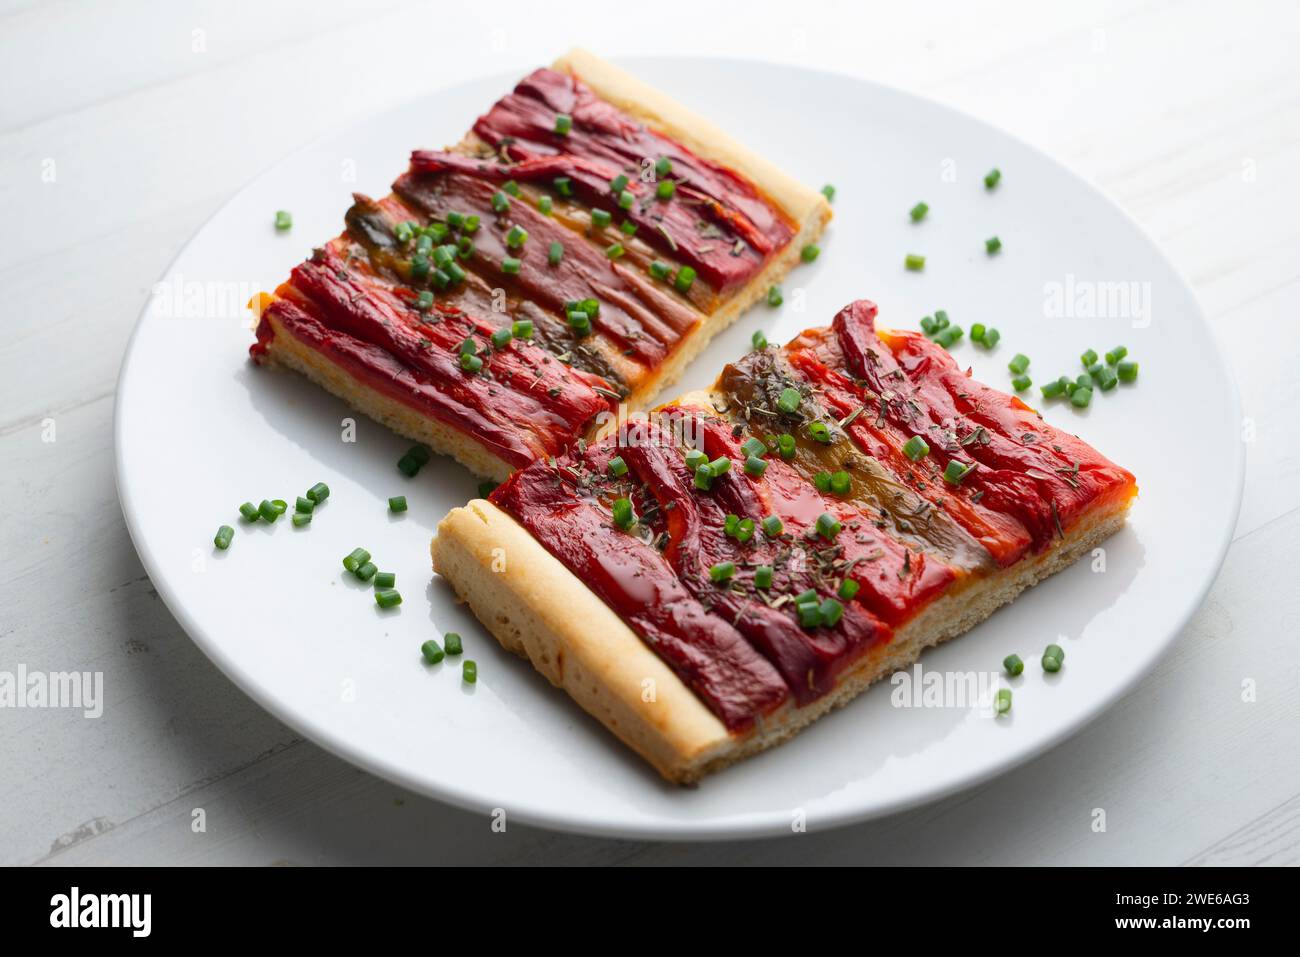 Tart with roasted red pepper Stock Photo